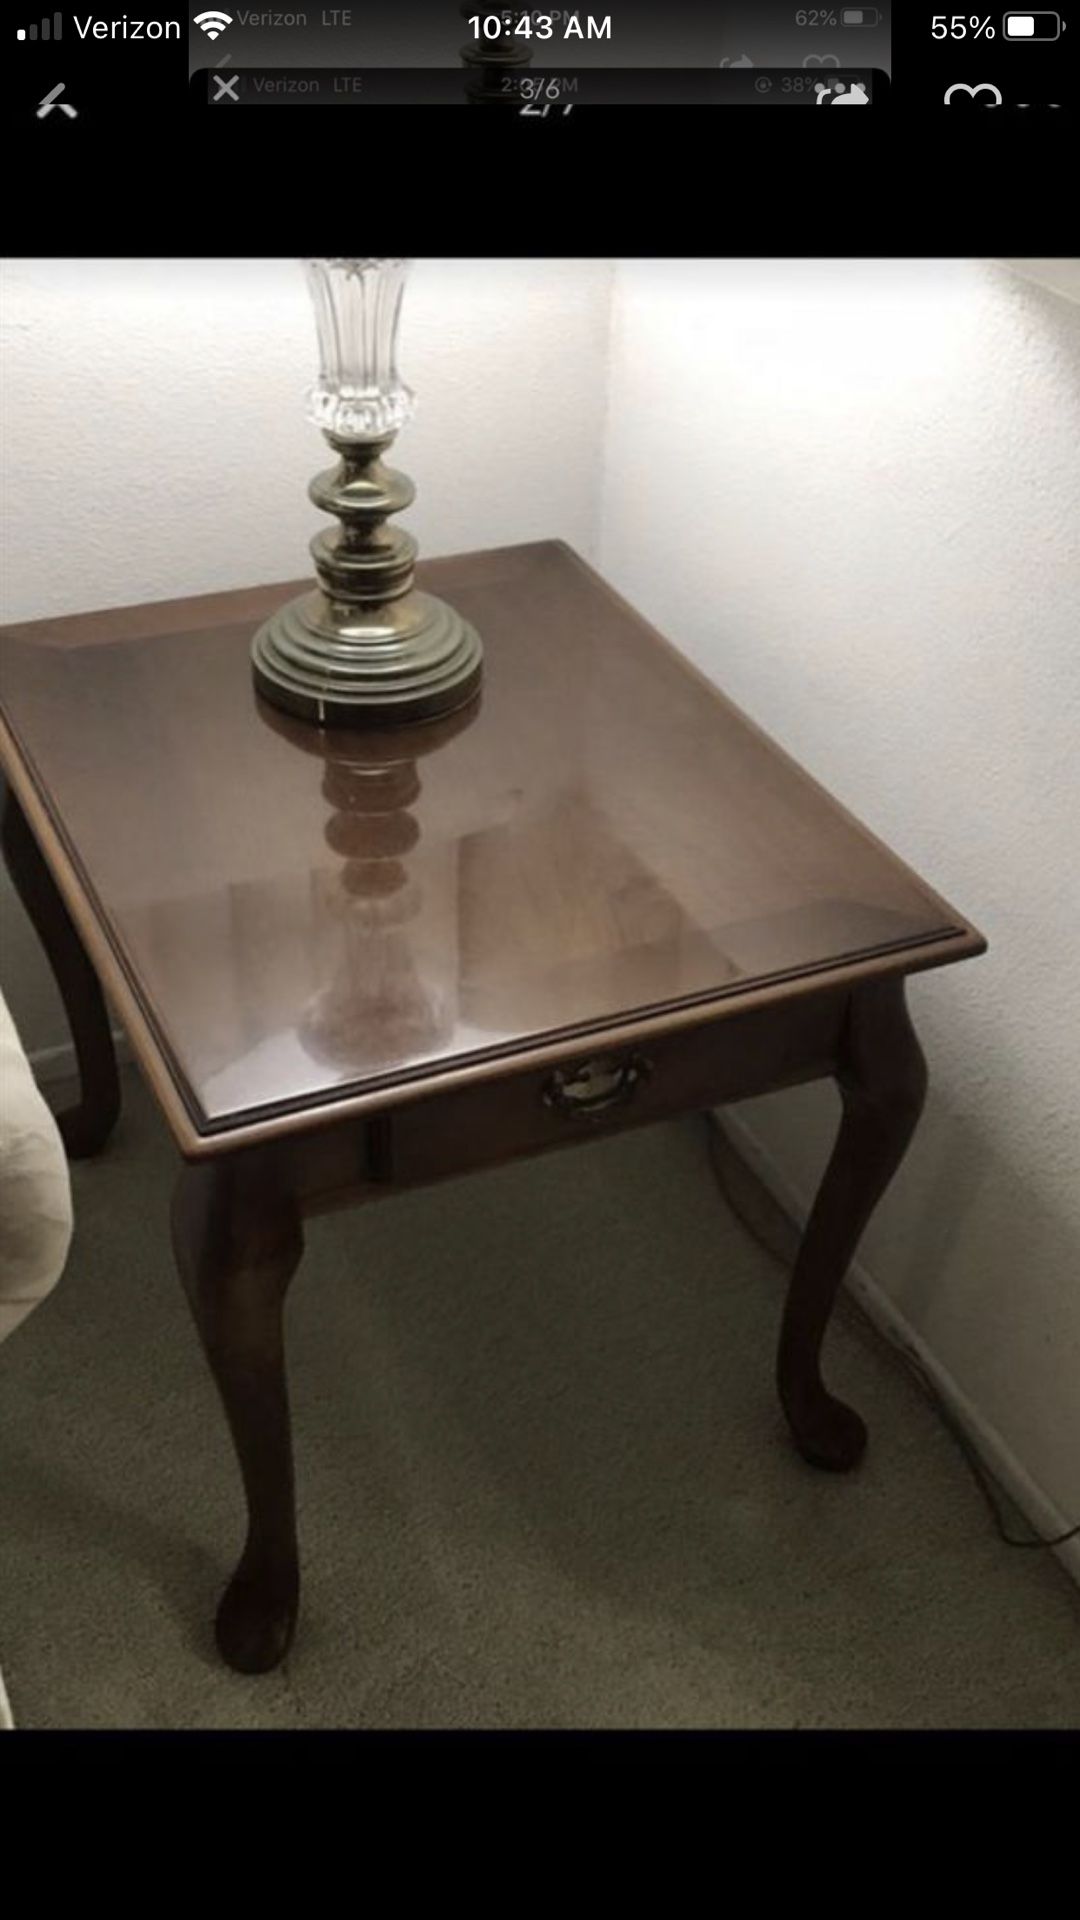 Cherry wood end tables